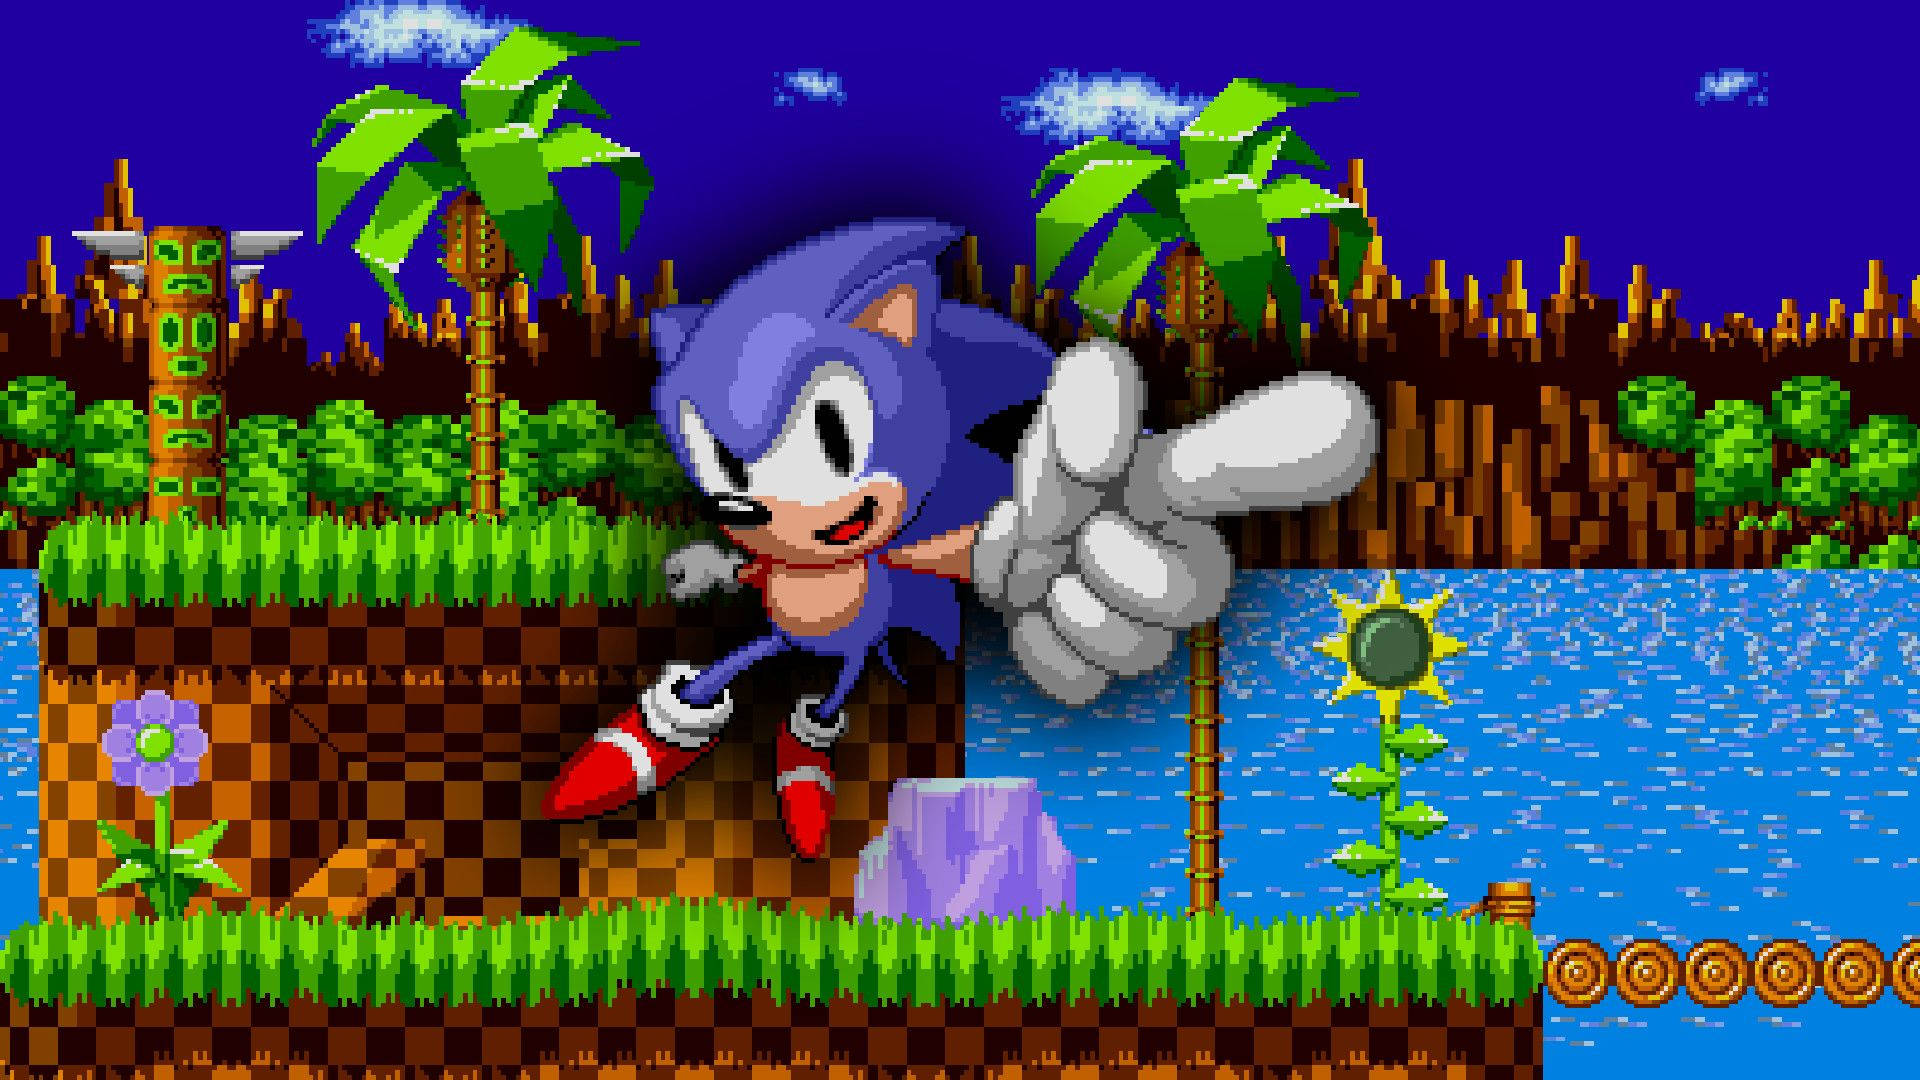 A nature-filled day in the iconic Green Hill Zone Wallpaper